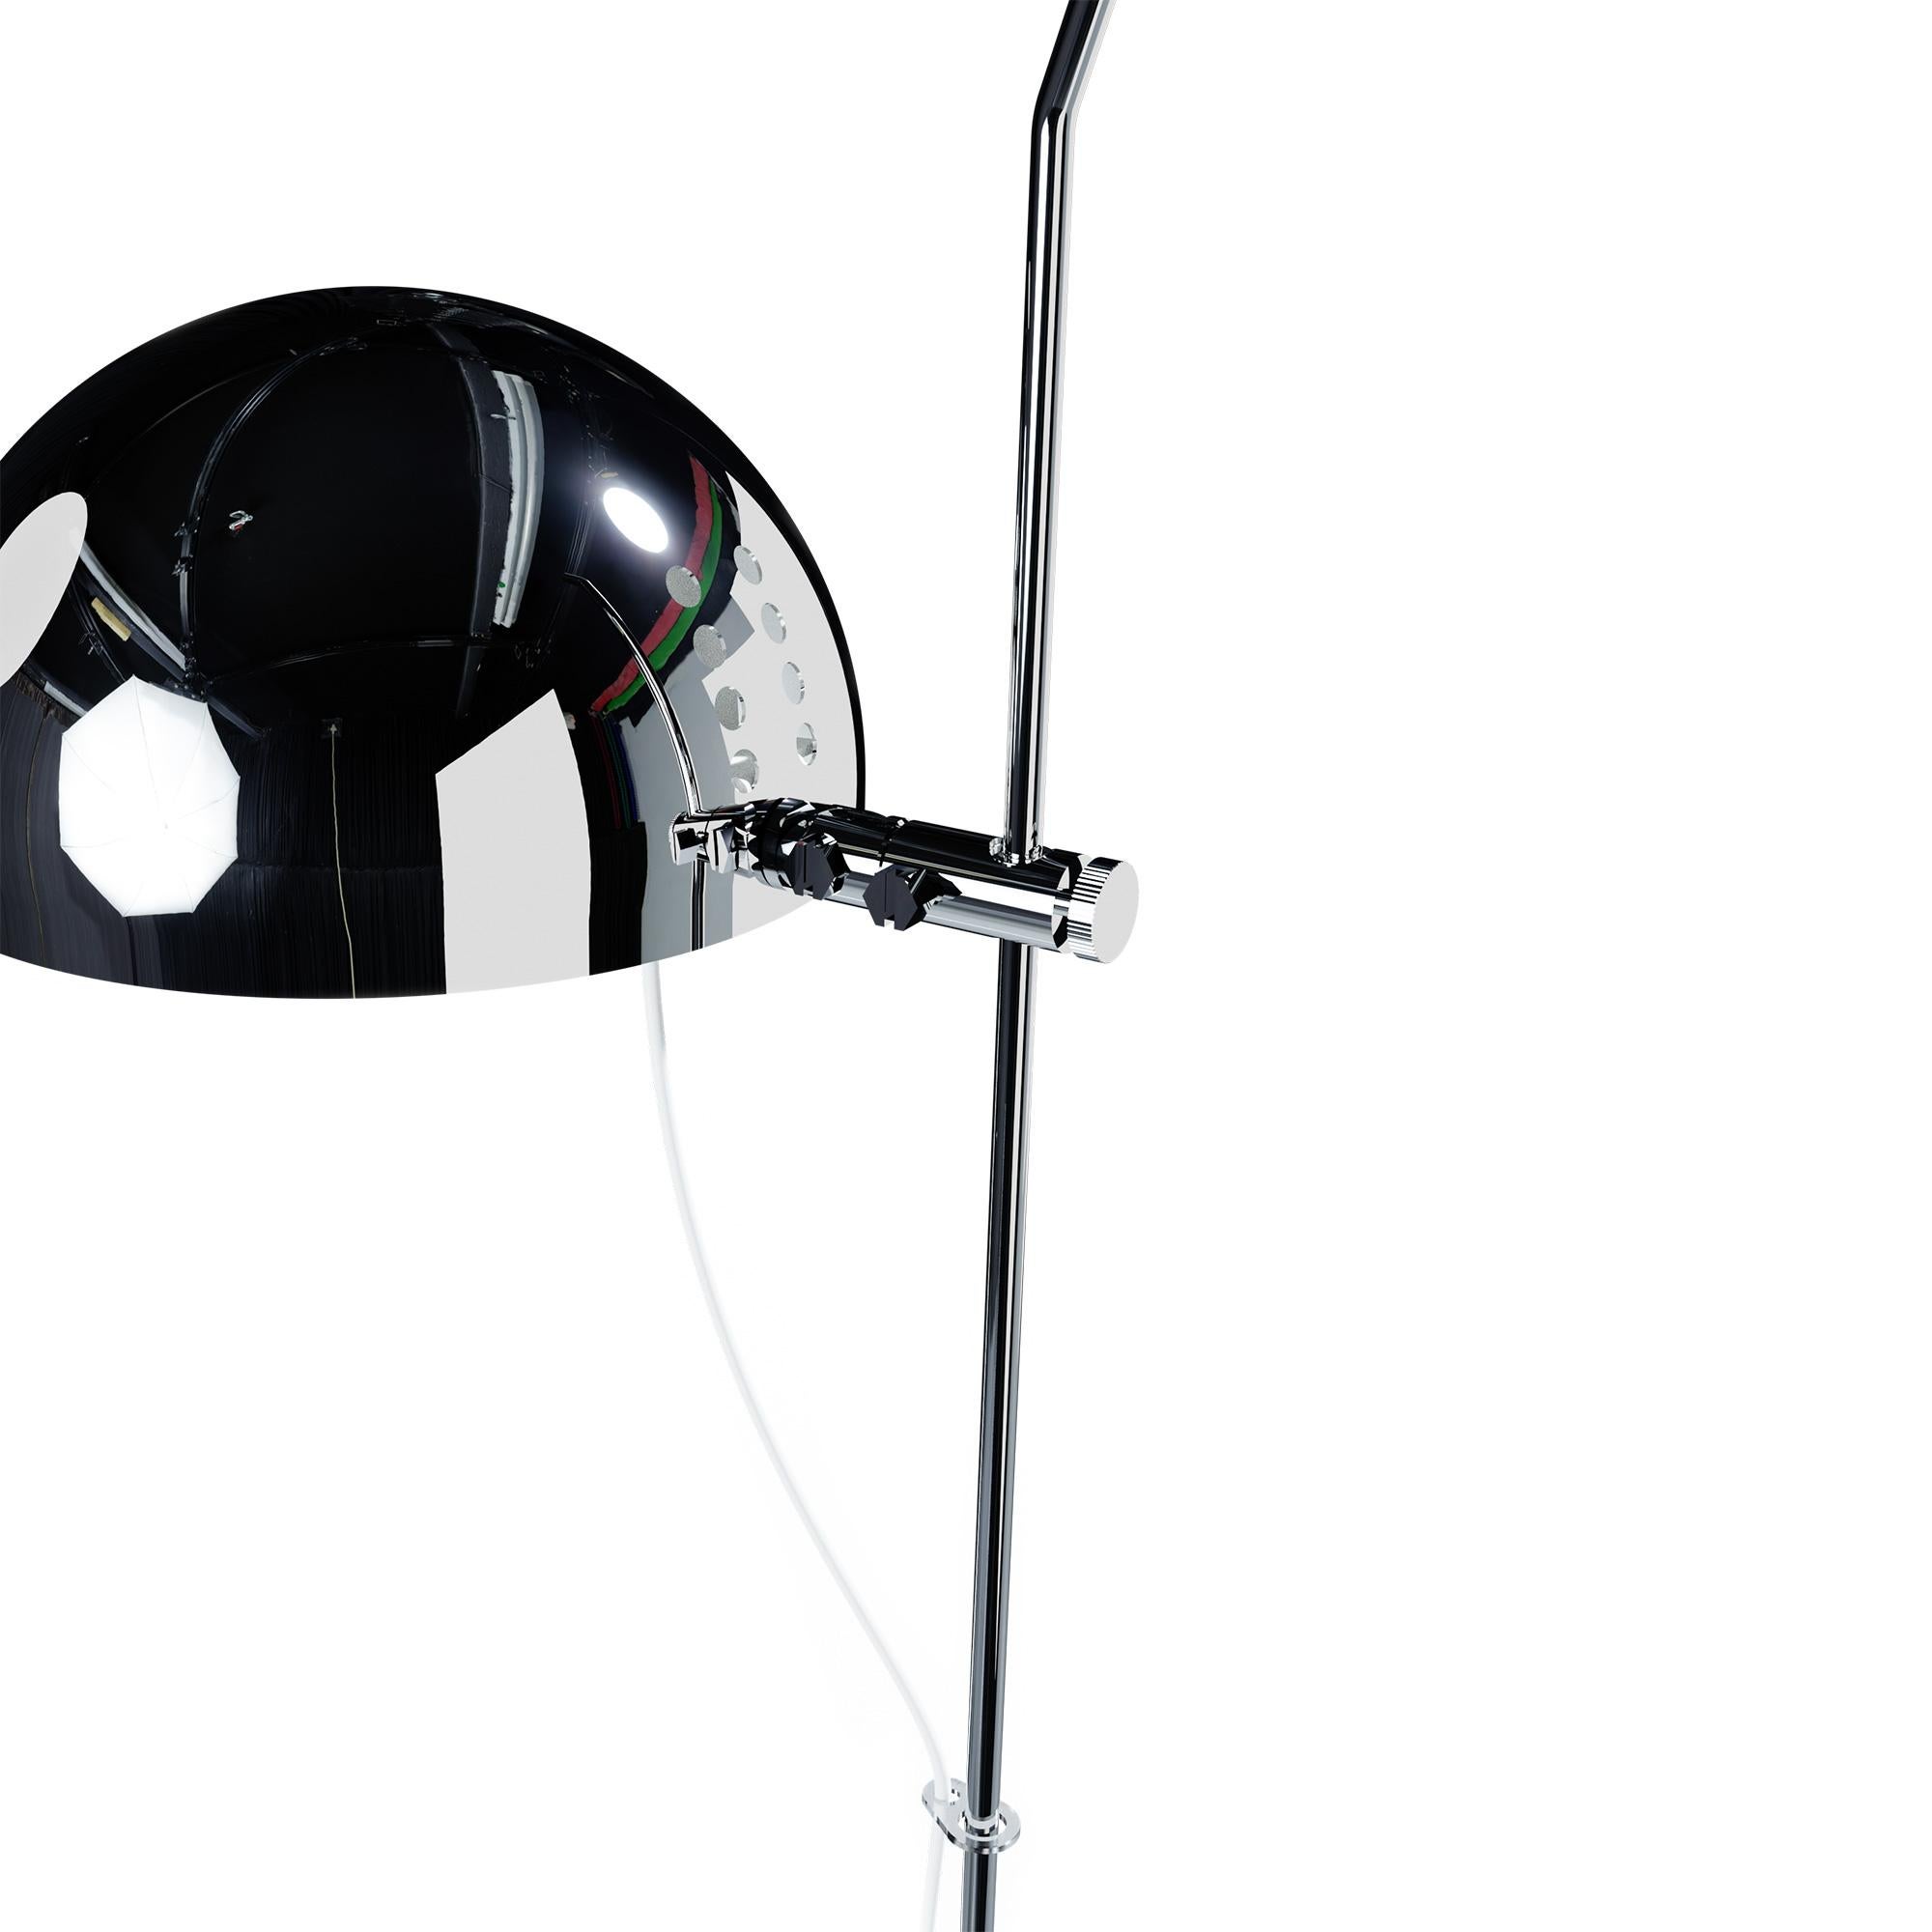 Alain Richard 'A21' desk lamp in Chrome for Disderot.

Executed in chromed metal, this newly produced numbered edition with included certificate of authenticity is made in France by Disderot with many of the same small-scale manufacturing